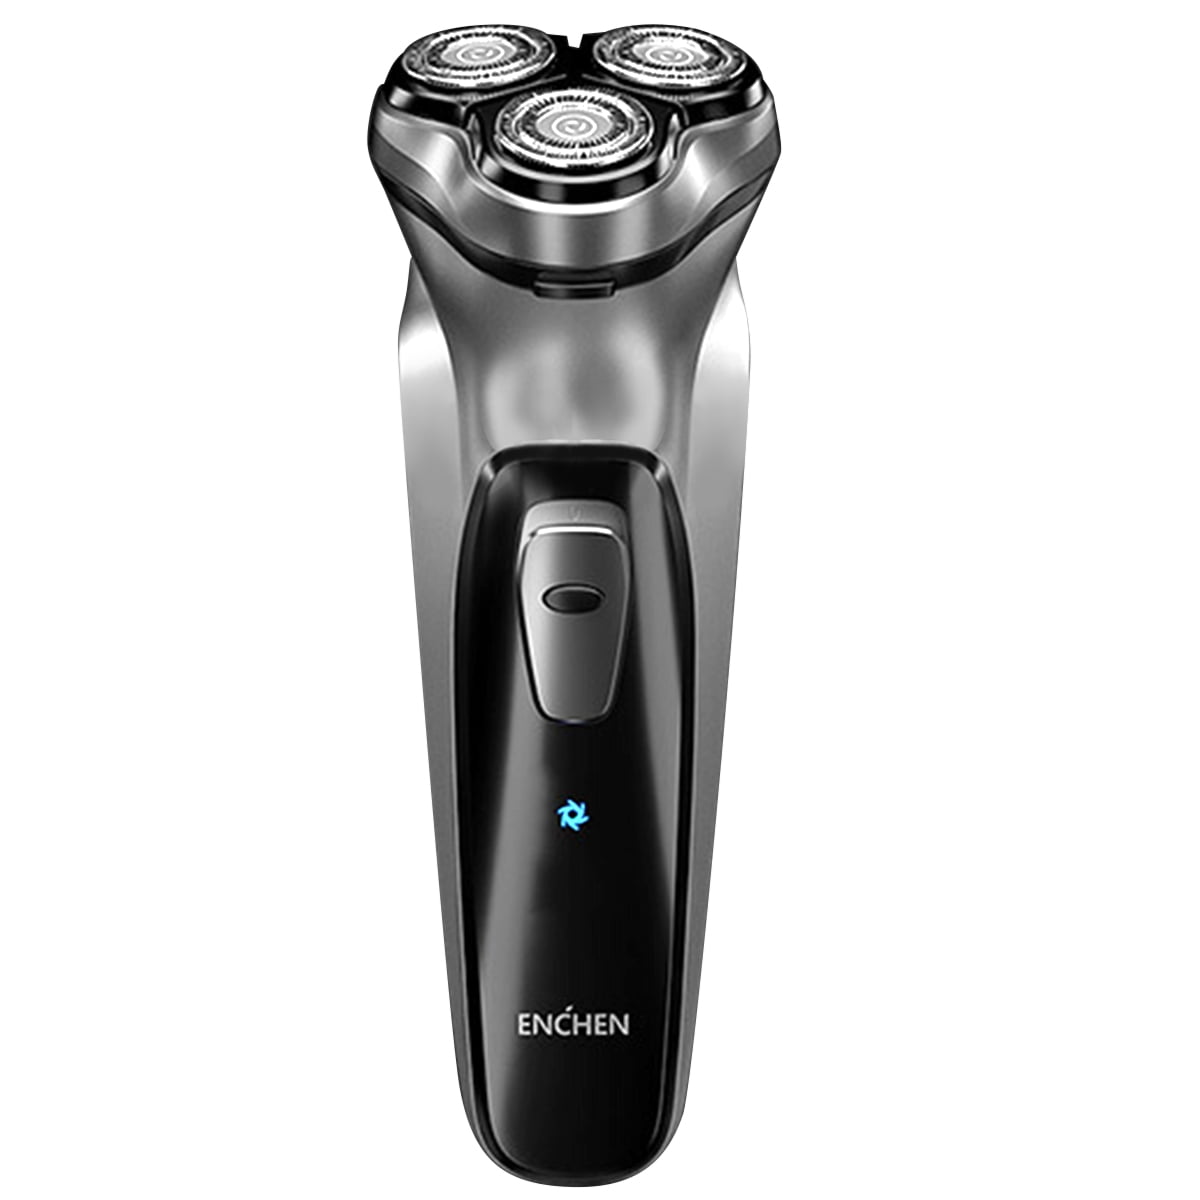 Cordless electric shaver